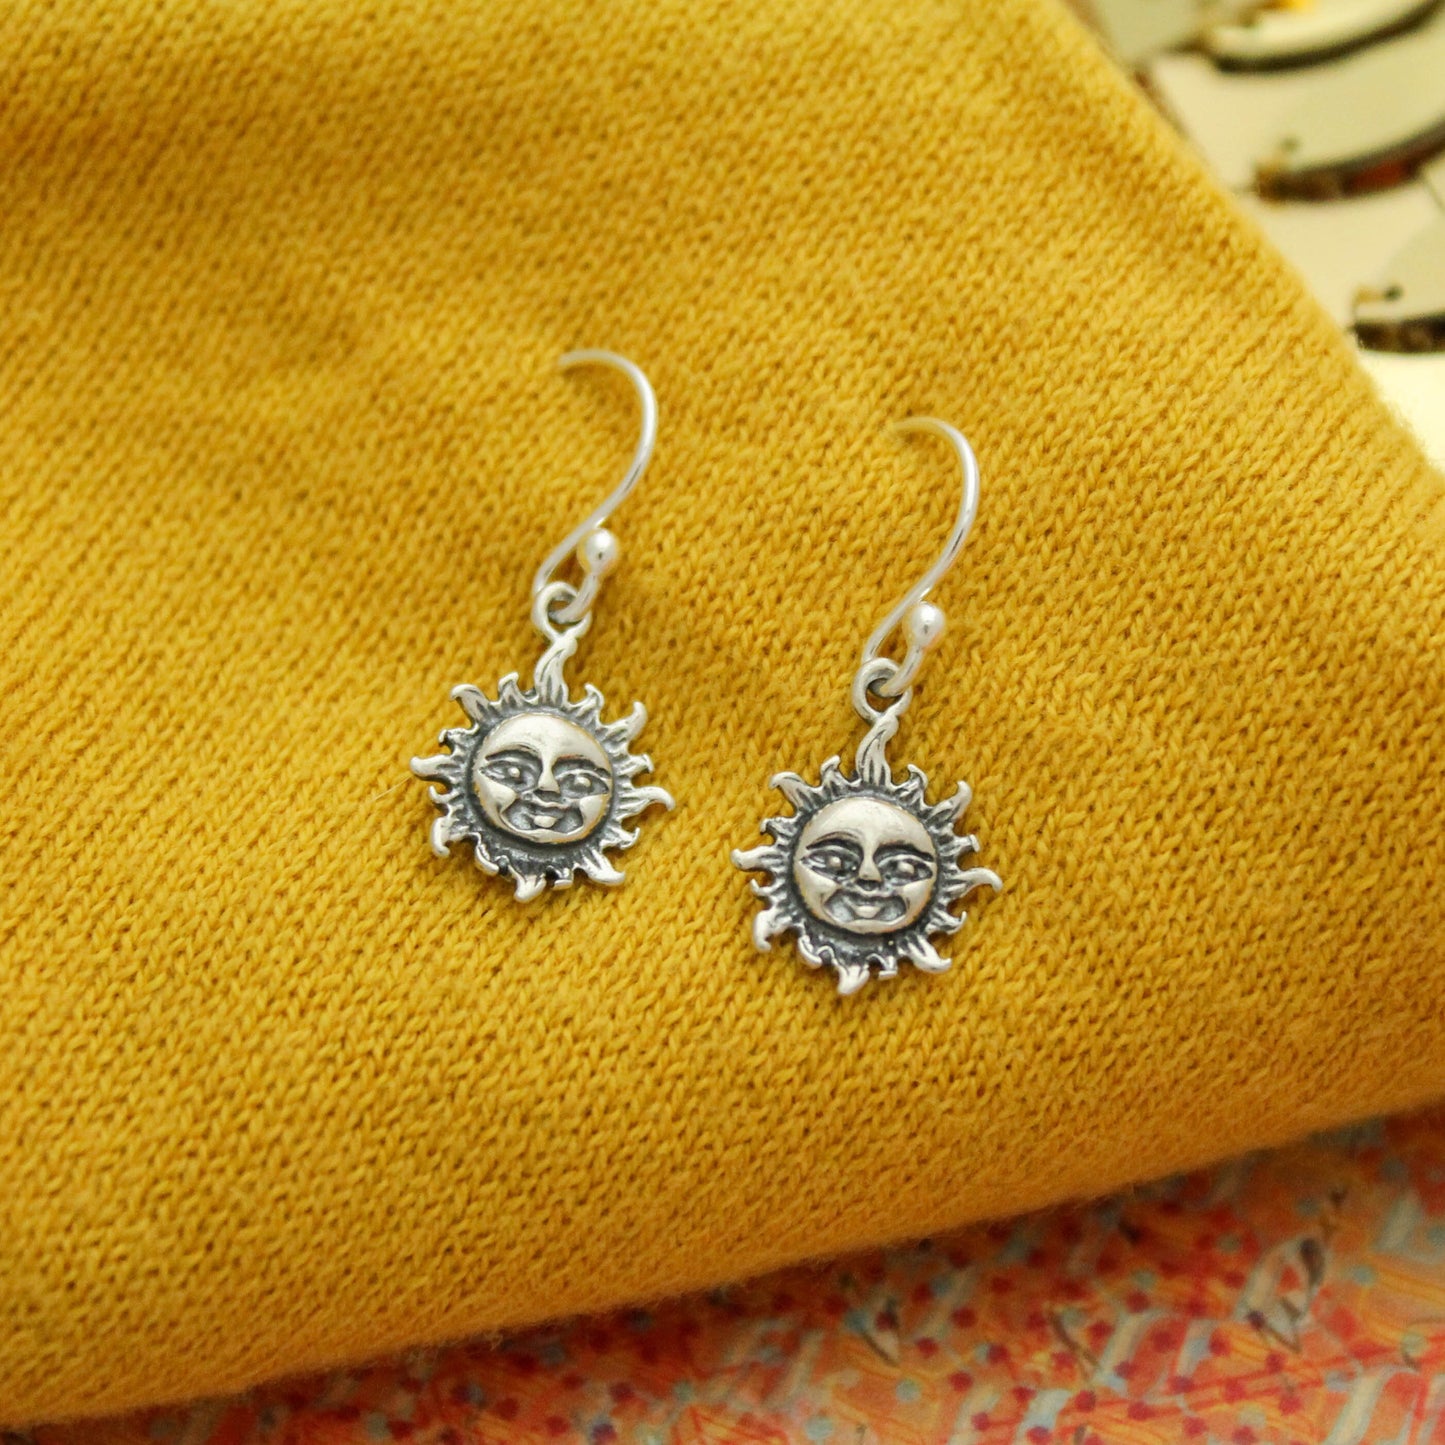 Cute Sun Earrings, Sterling Silver Shore Earrings, Sun Jewelry, Sterling Silver Beach Sunshine Earrings, Gifts for Her, Sunny Celestial